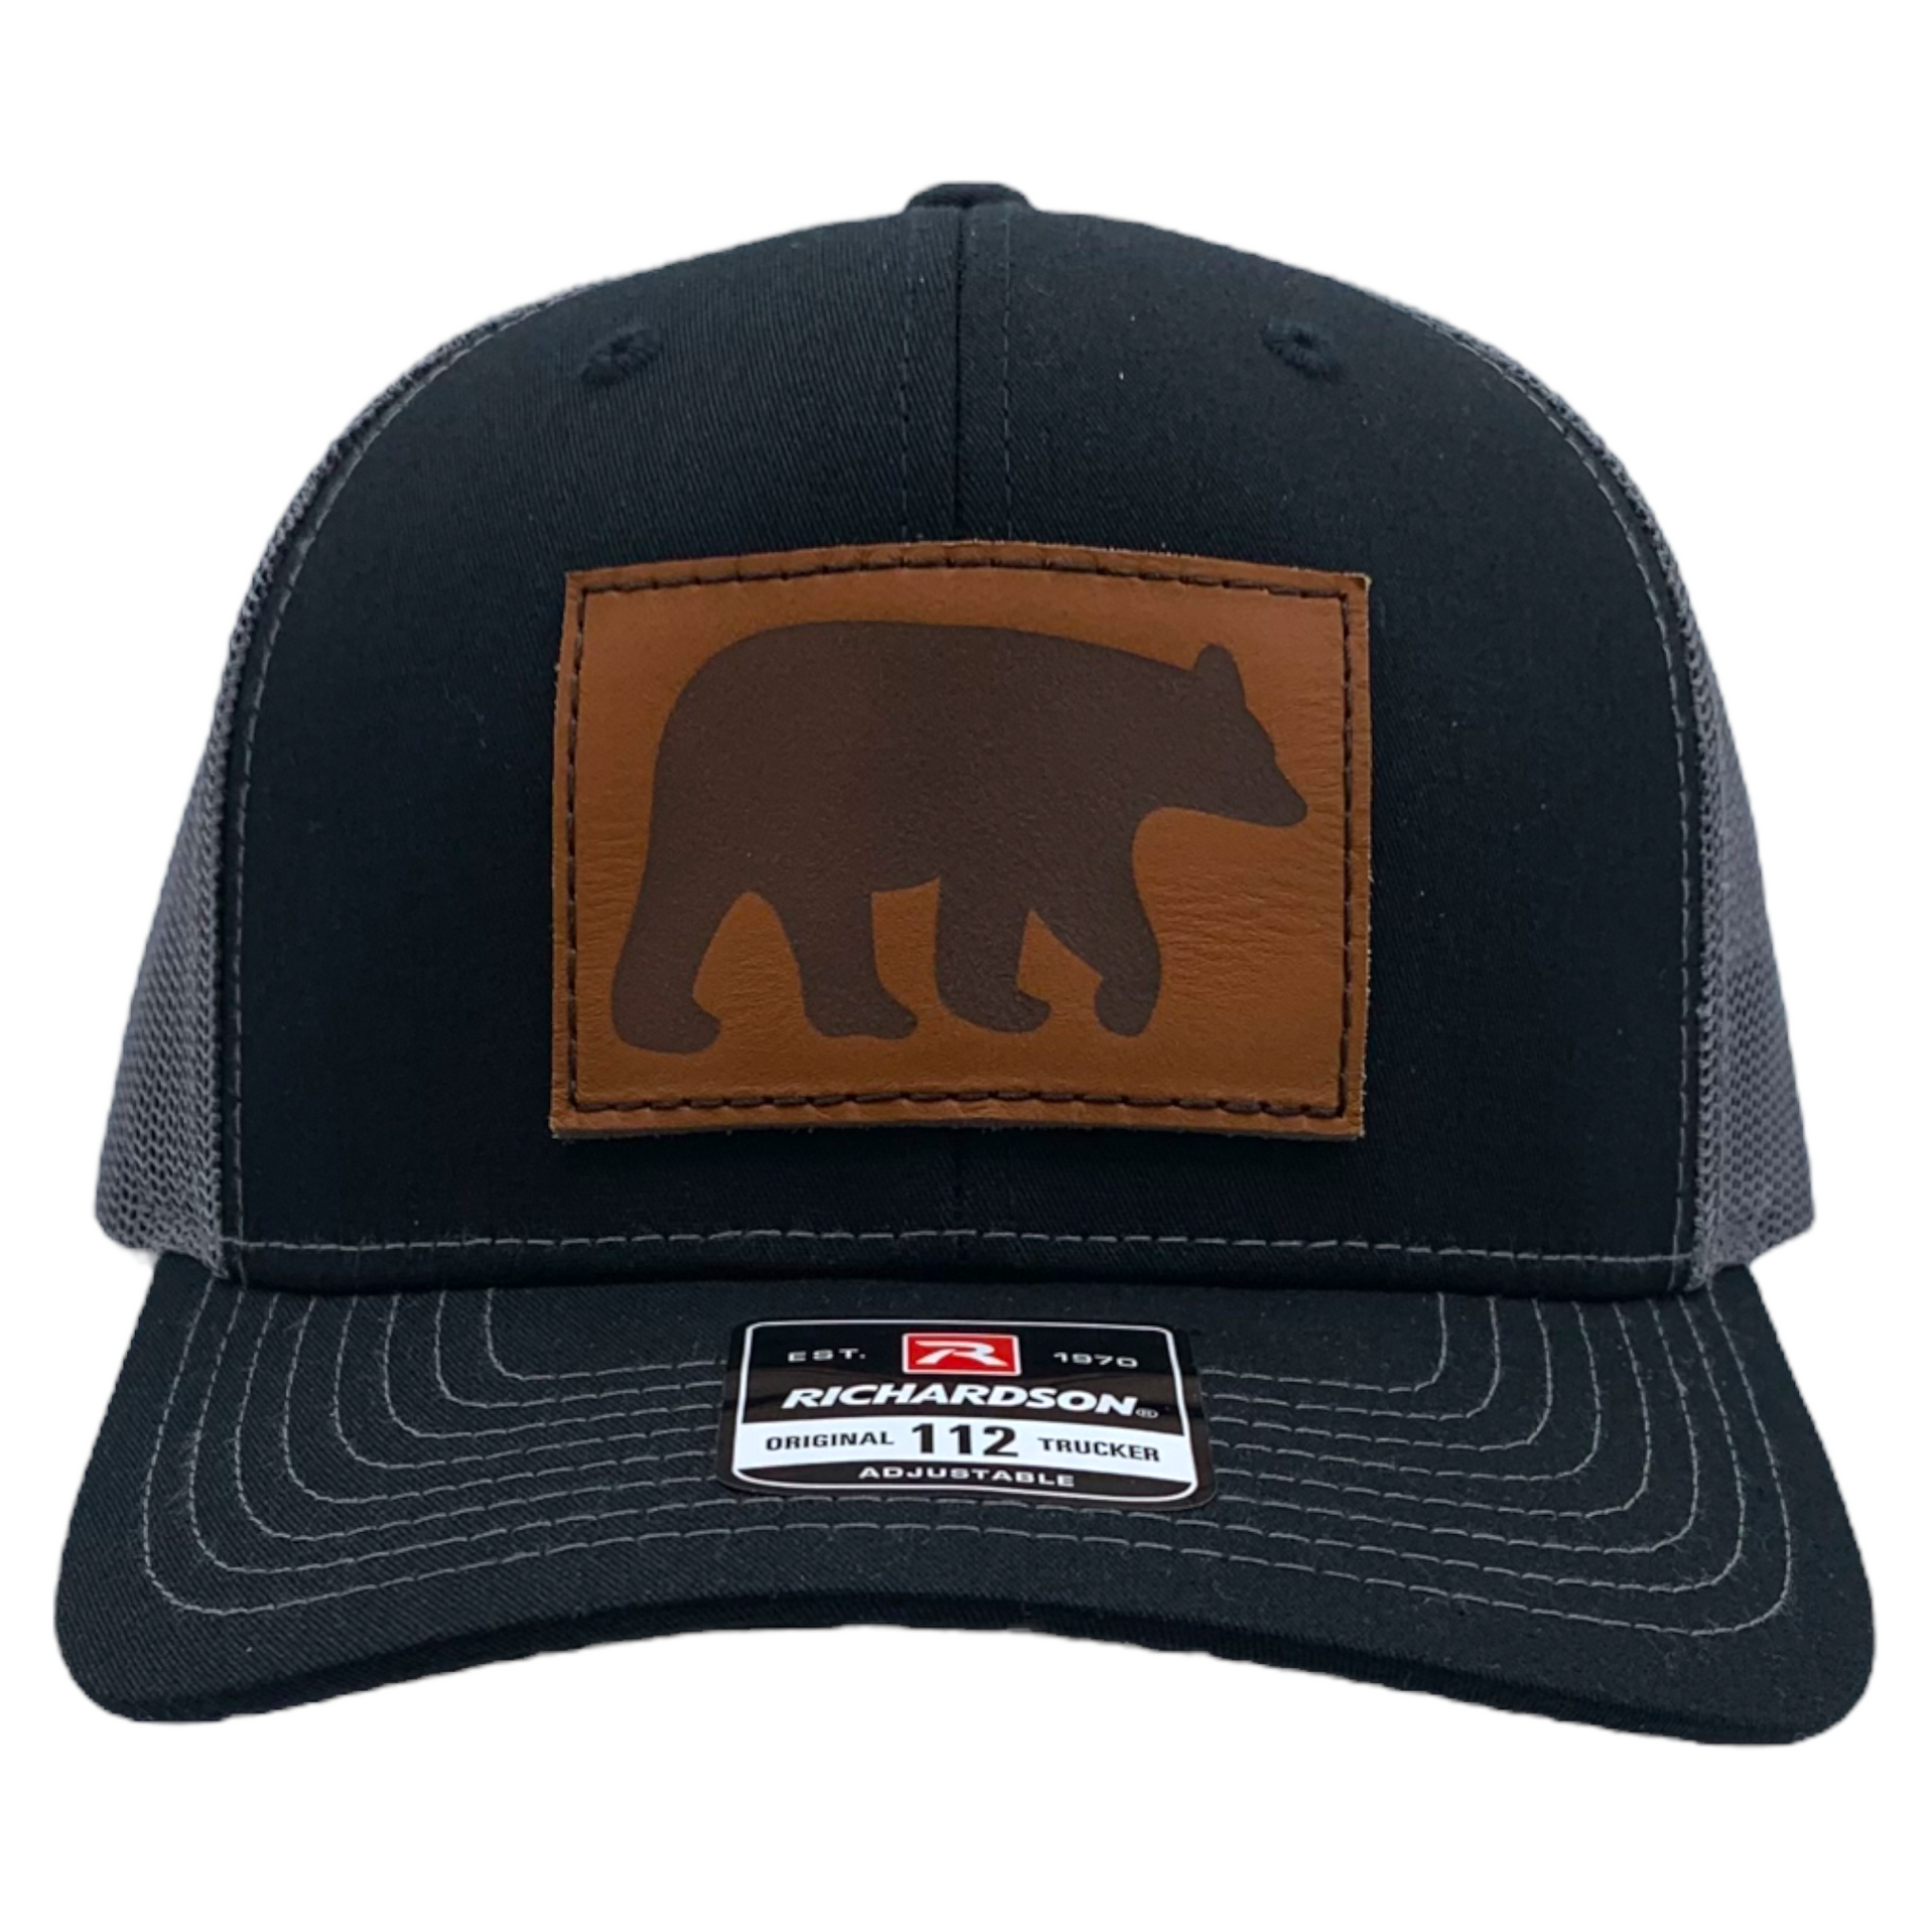 Burton Leather Patch Trucker Baseball Black and Charcoal - The ASHEVILLE Co. TM